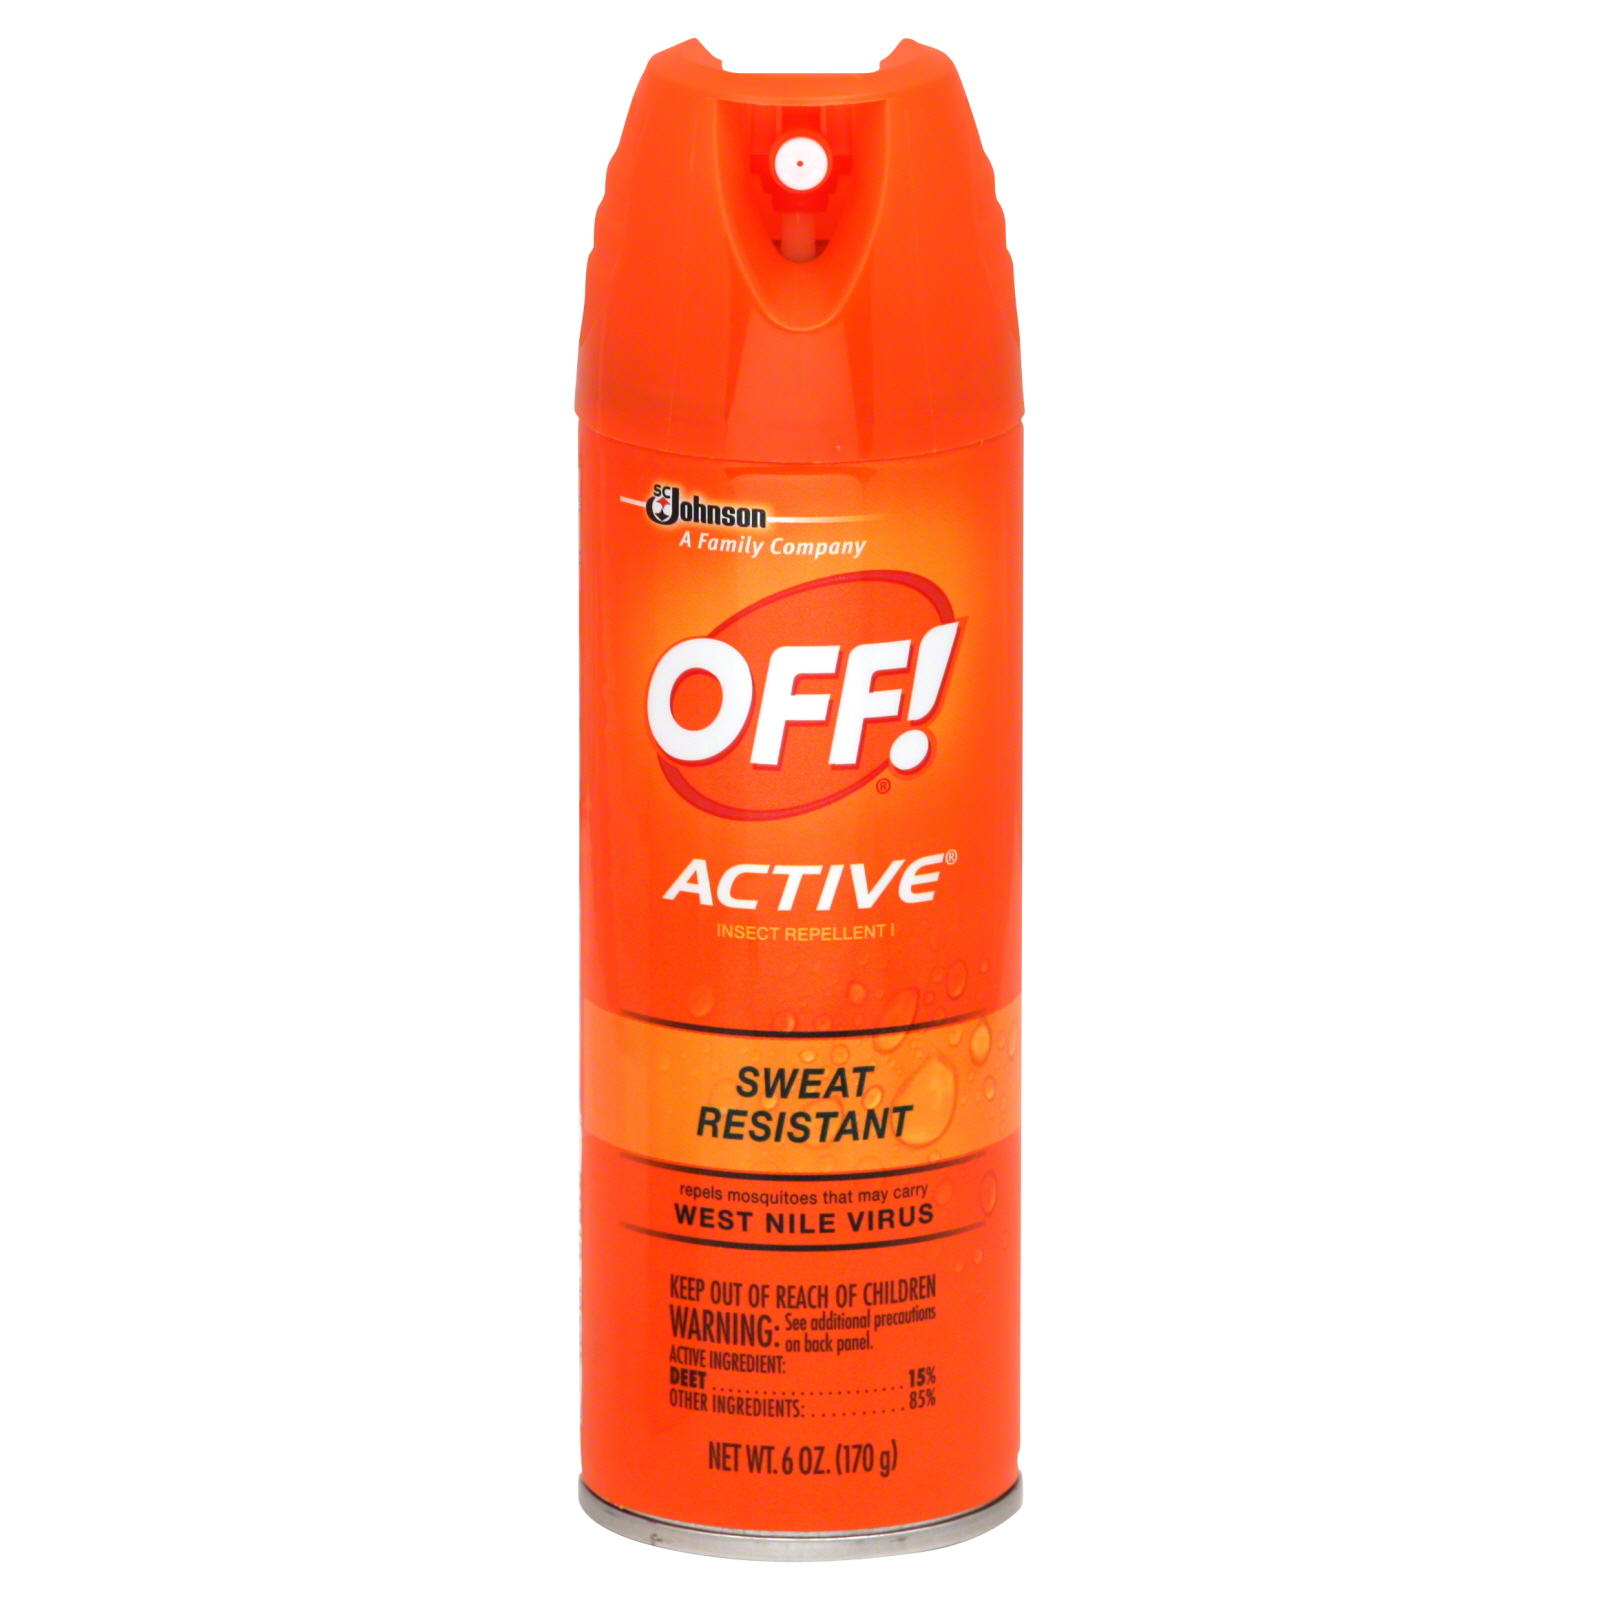 Off! Active Insect Repellent I, Sweat Resistant, 6 oz (170 g)